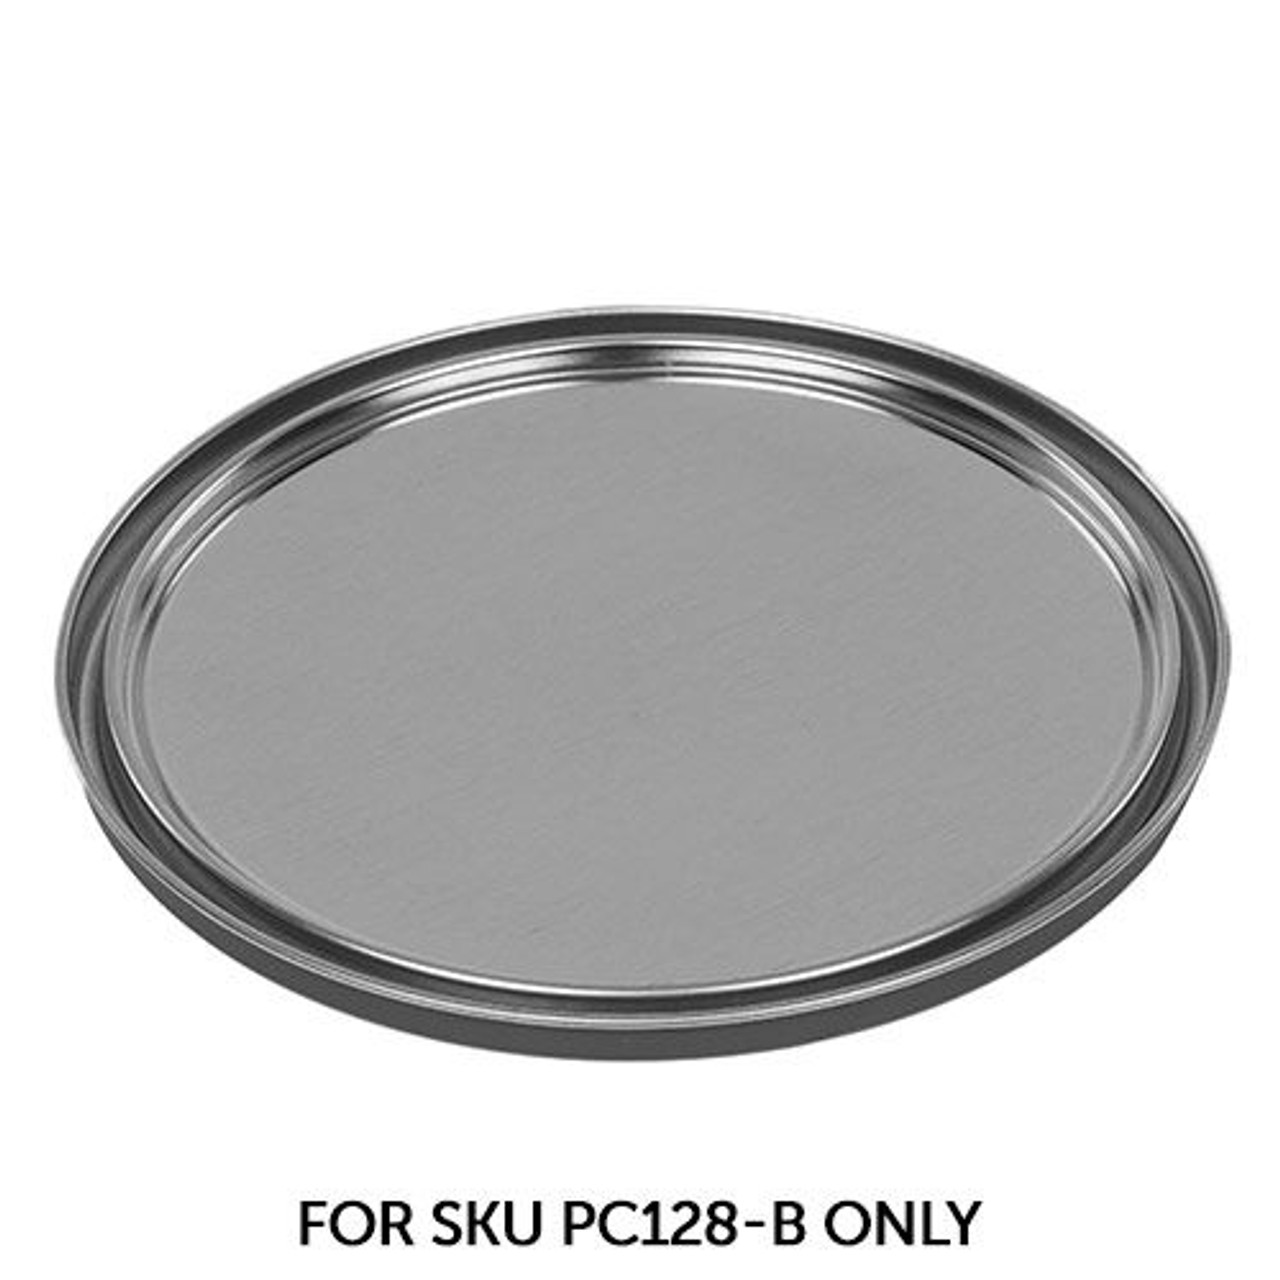 METAL LID FOR 1 GALLON PLASTIC PAINT CAN